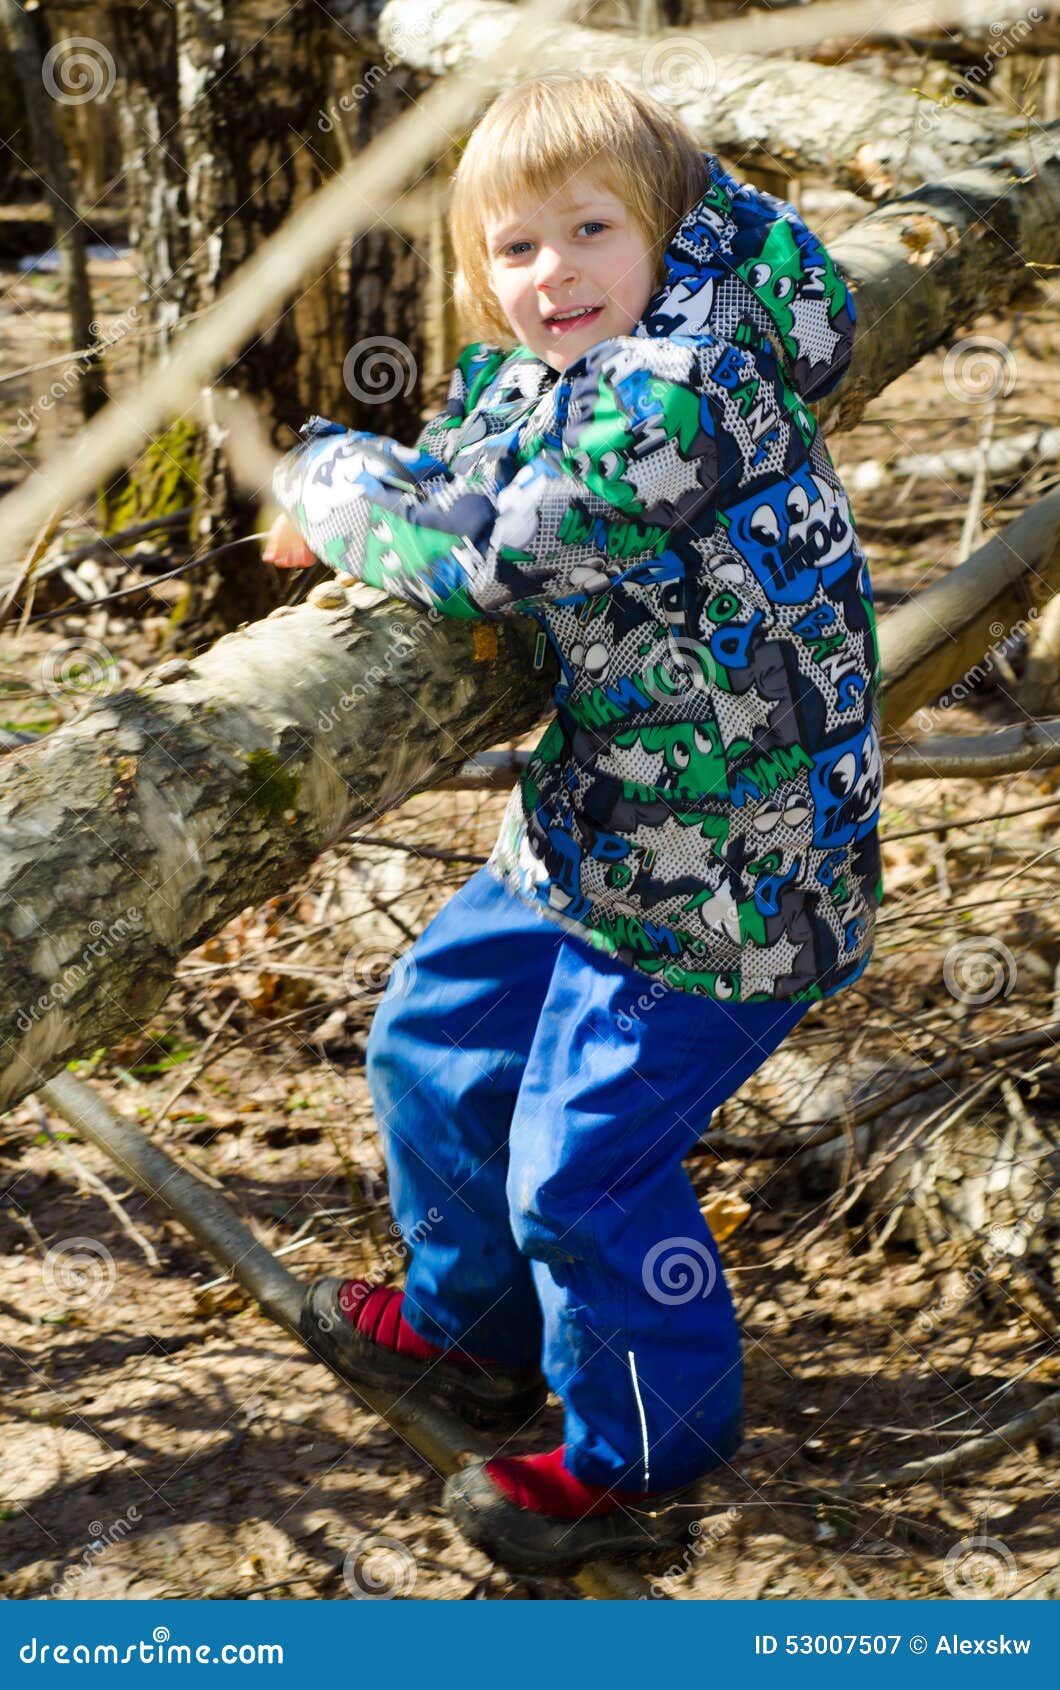 A boy climbs on a tree in the spring forest